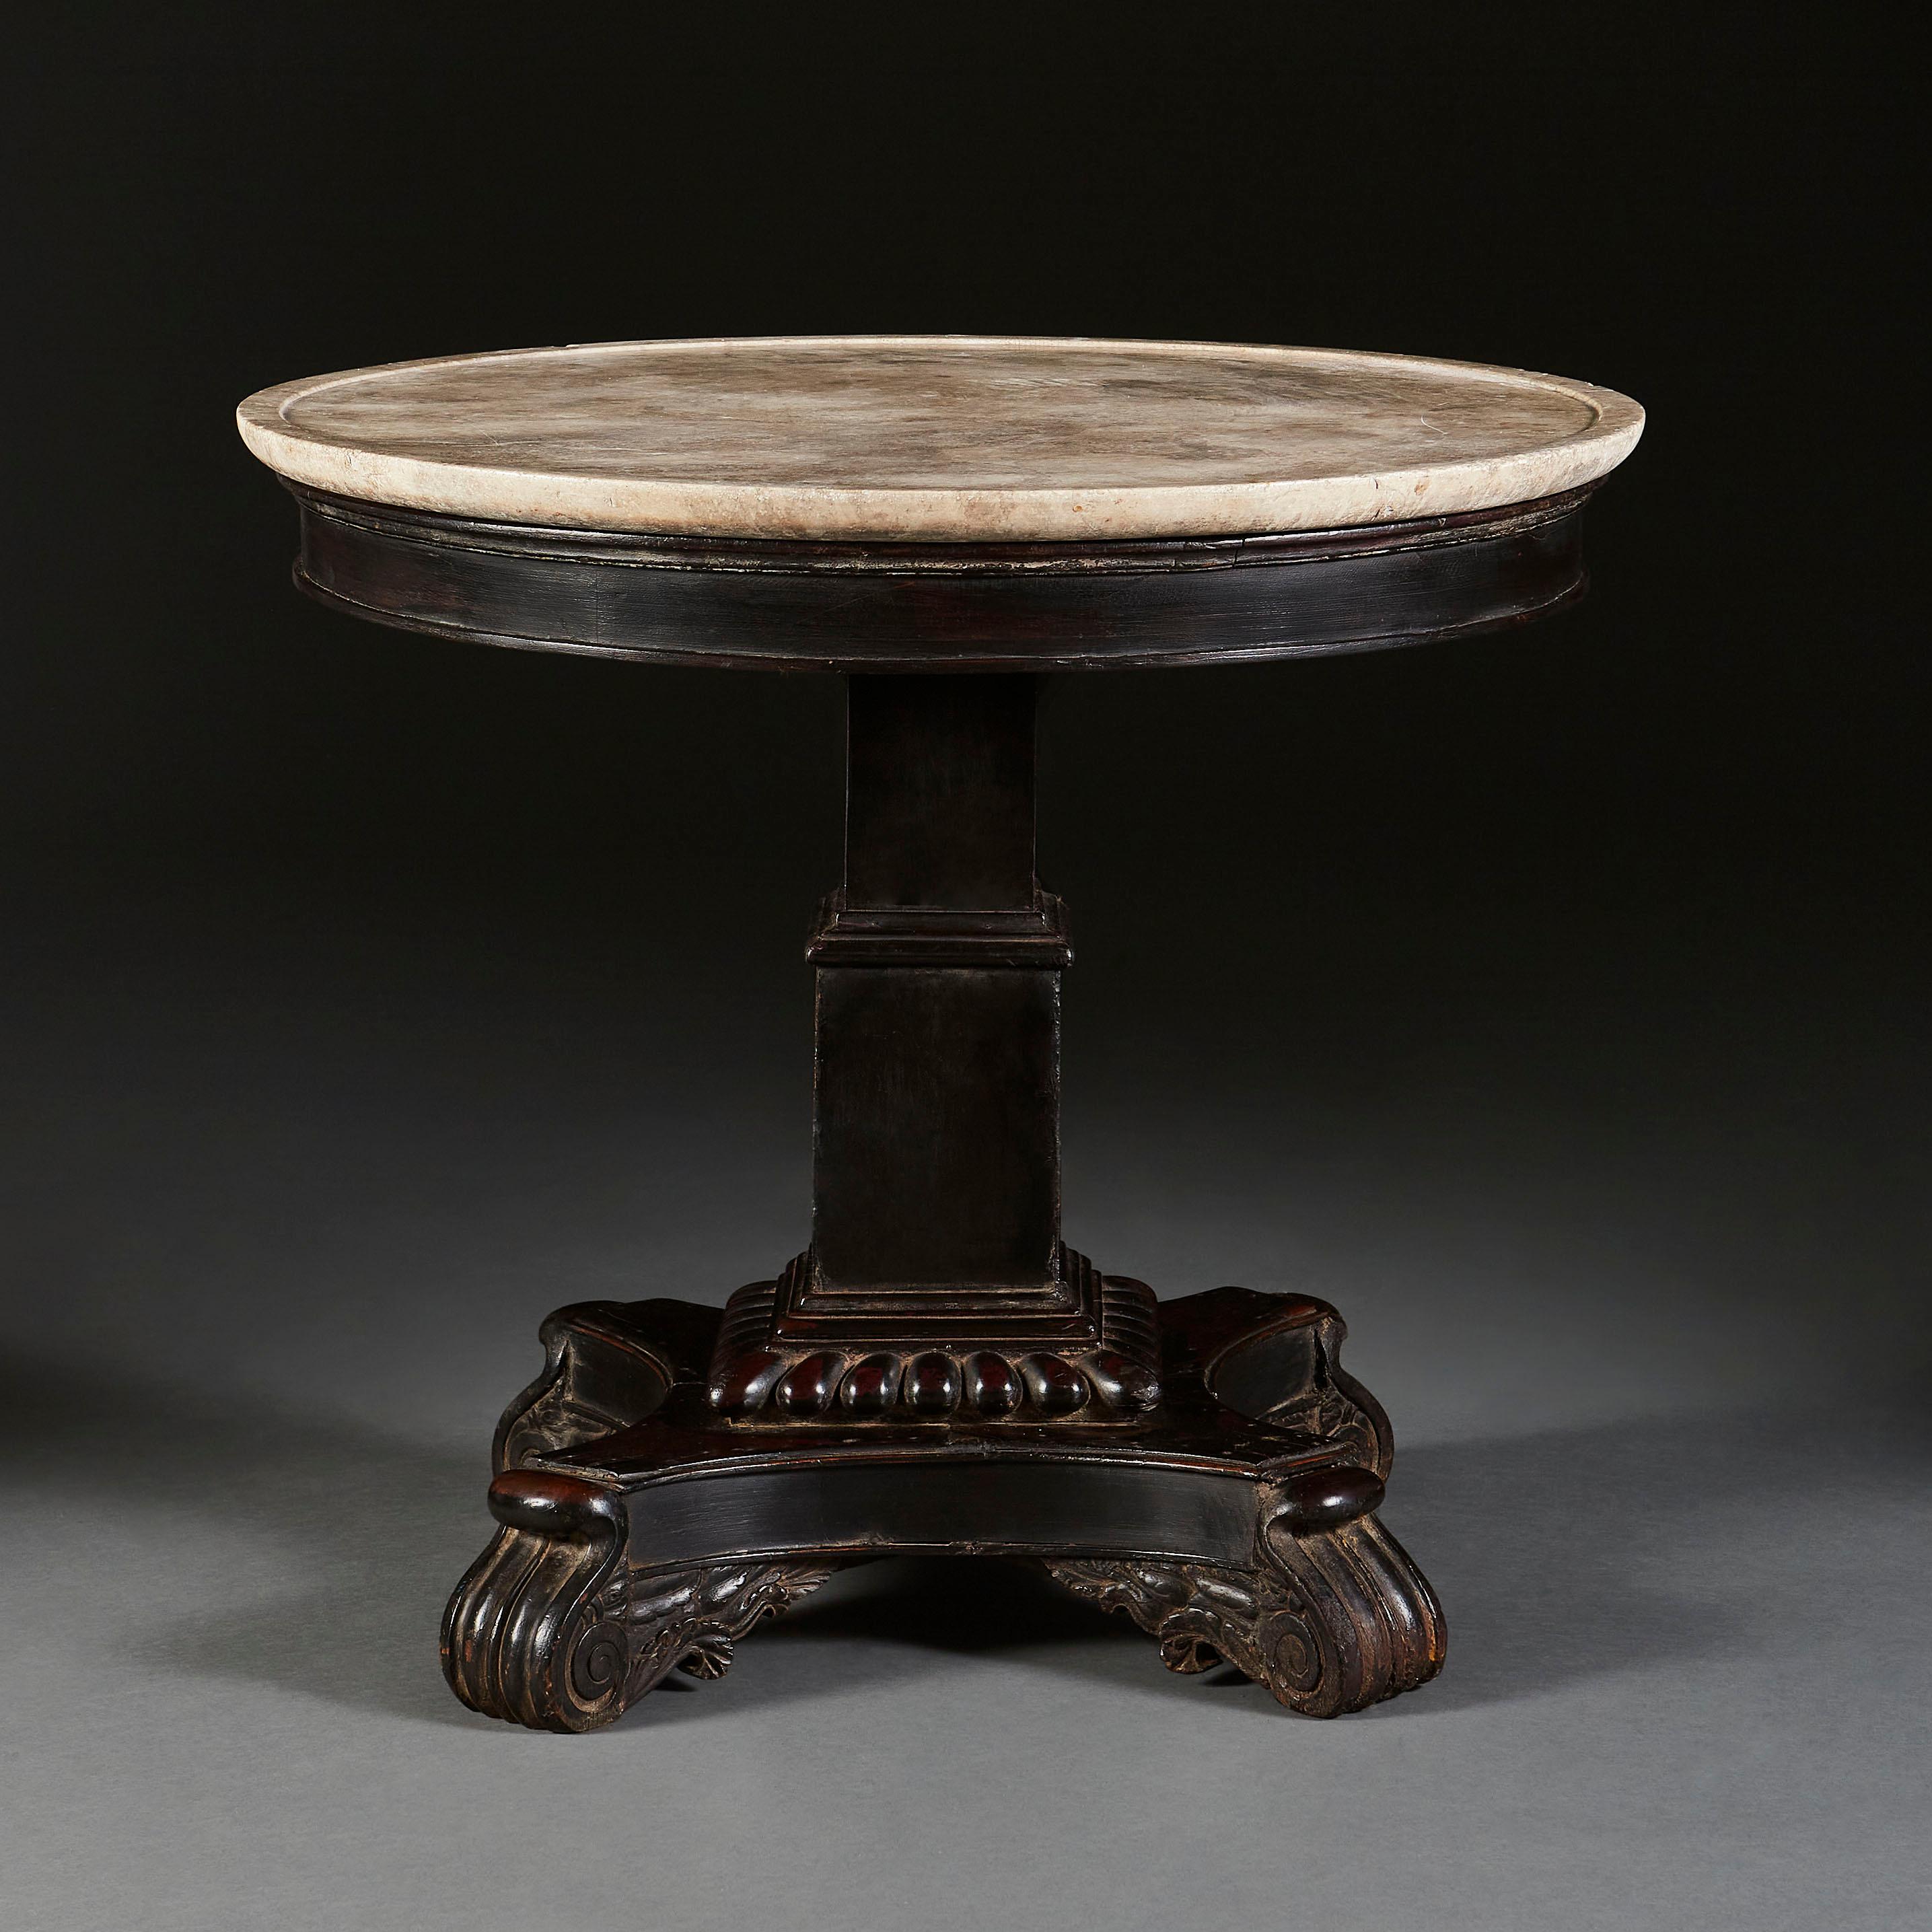 A mid-19th century Anglo-Indian centre table with carved ebonized pedestal base, supported with four scroll feet, with off-white figured marble dish top.